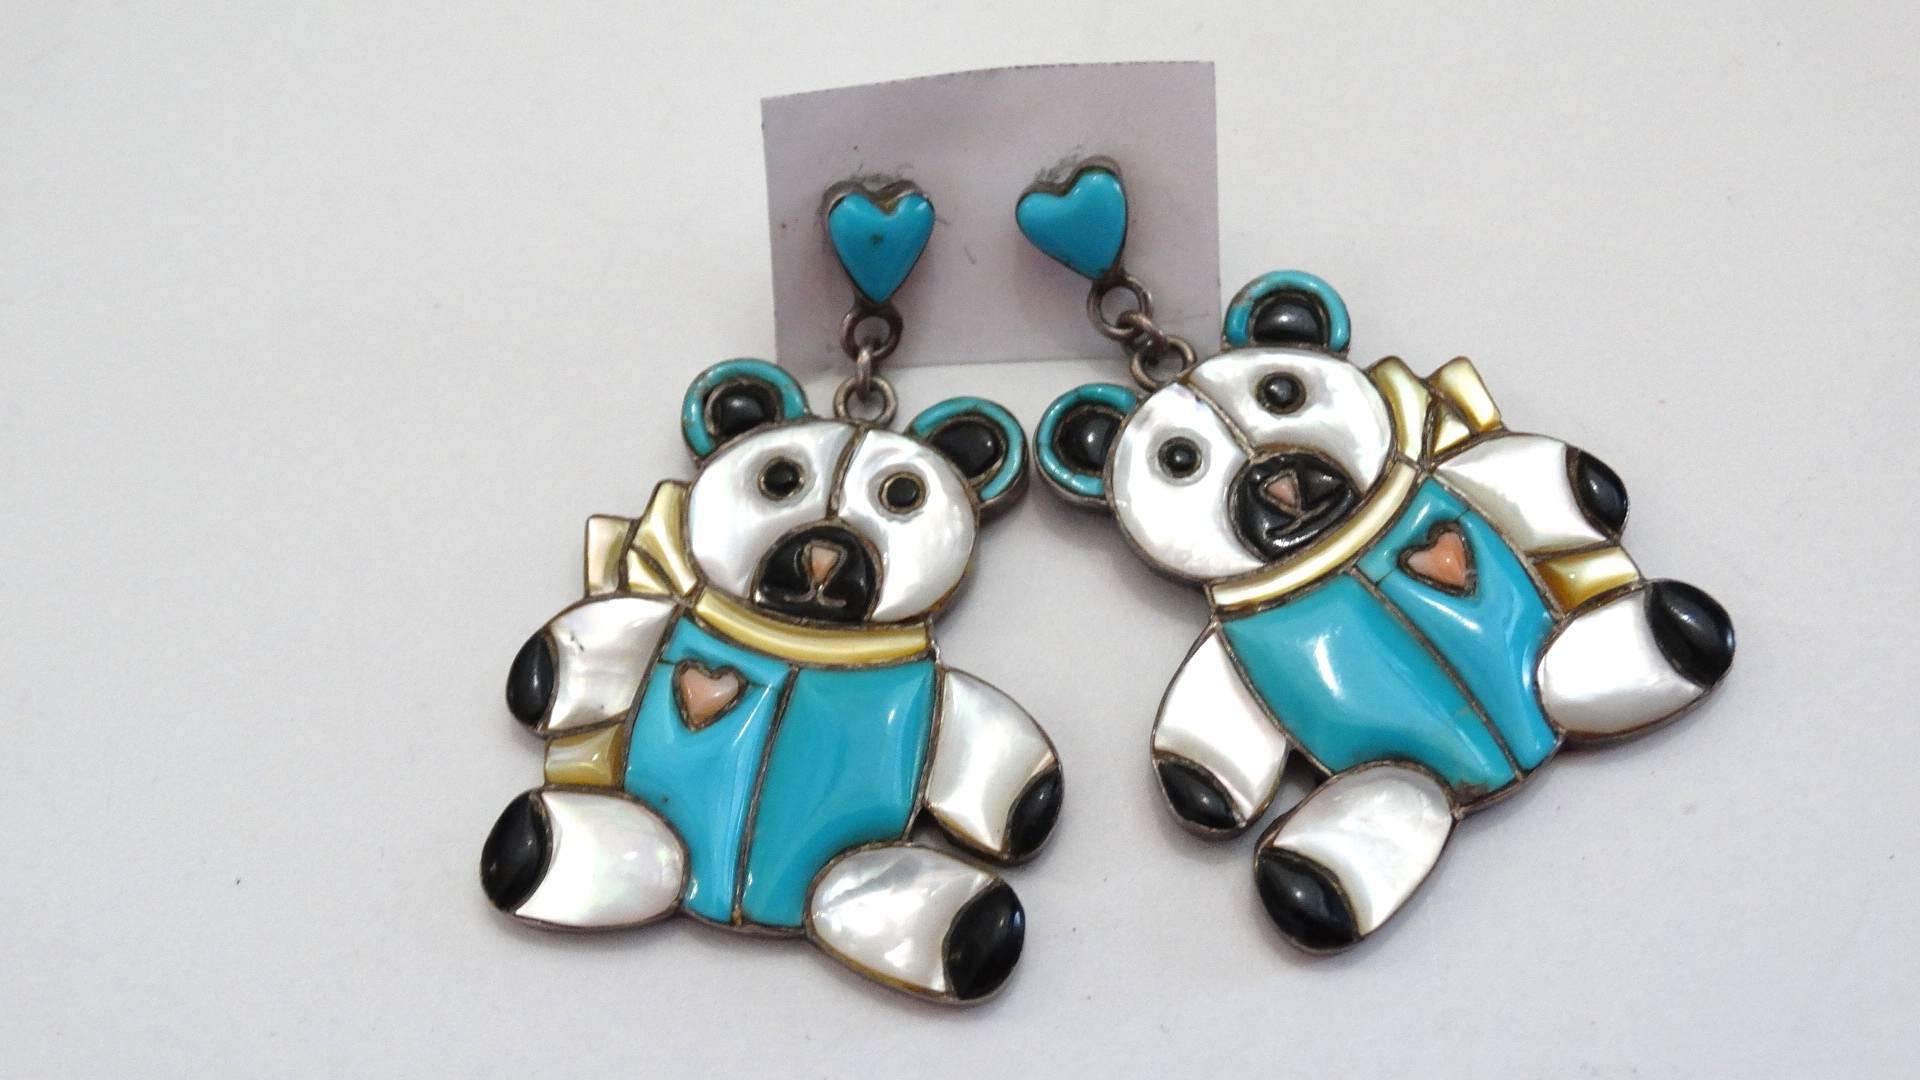 Rock a novelty earring with our adorable 1980s Zuni teddy bear earrings! Made of 100% silver. Heart shaped posts with Zuni turquoise inlayed, with pierced backings. Dangly teddy bear pendants with inlays of iridescent pearl, turquoise and black onyx